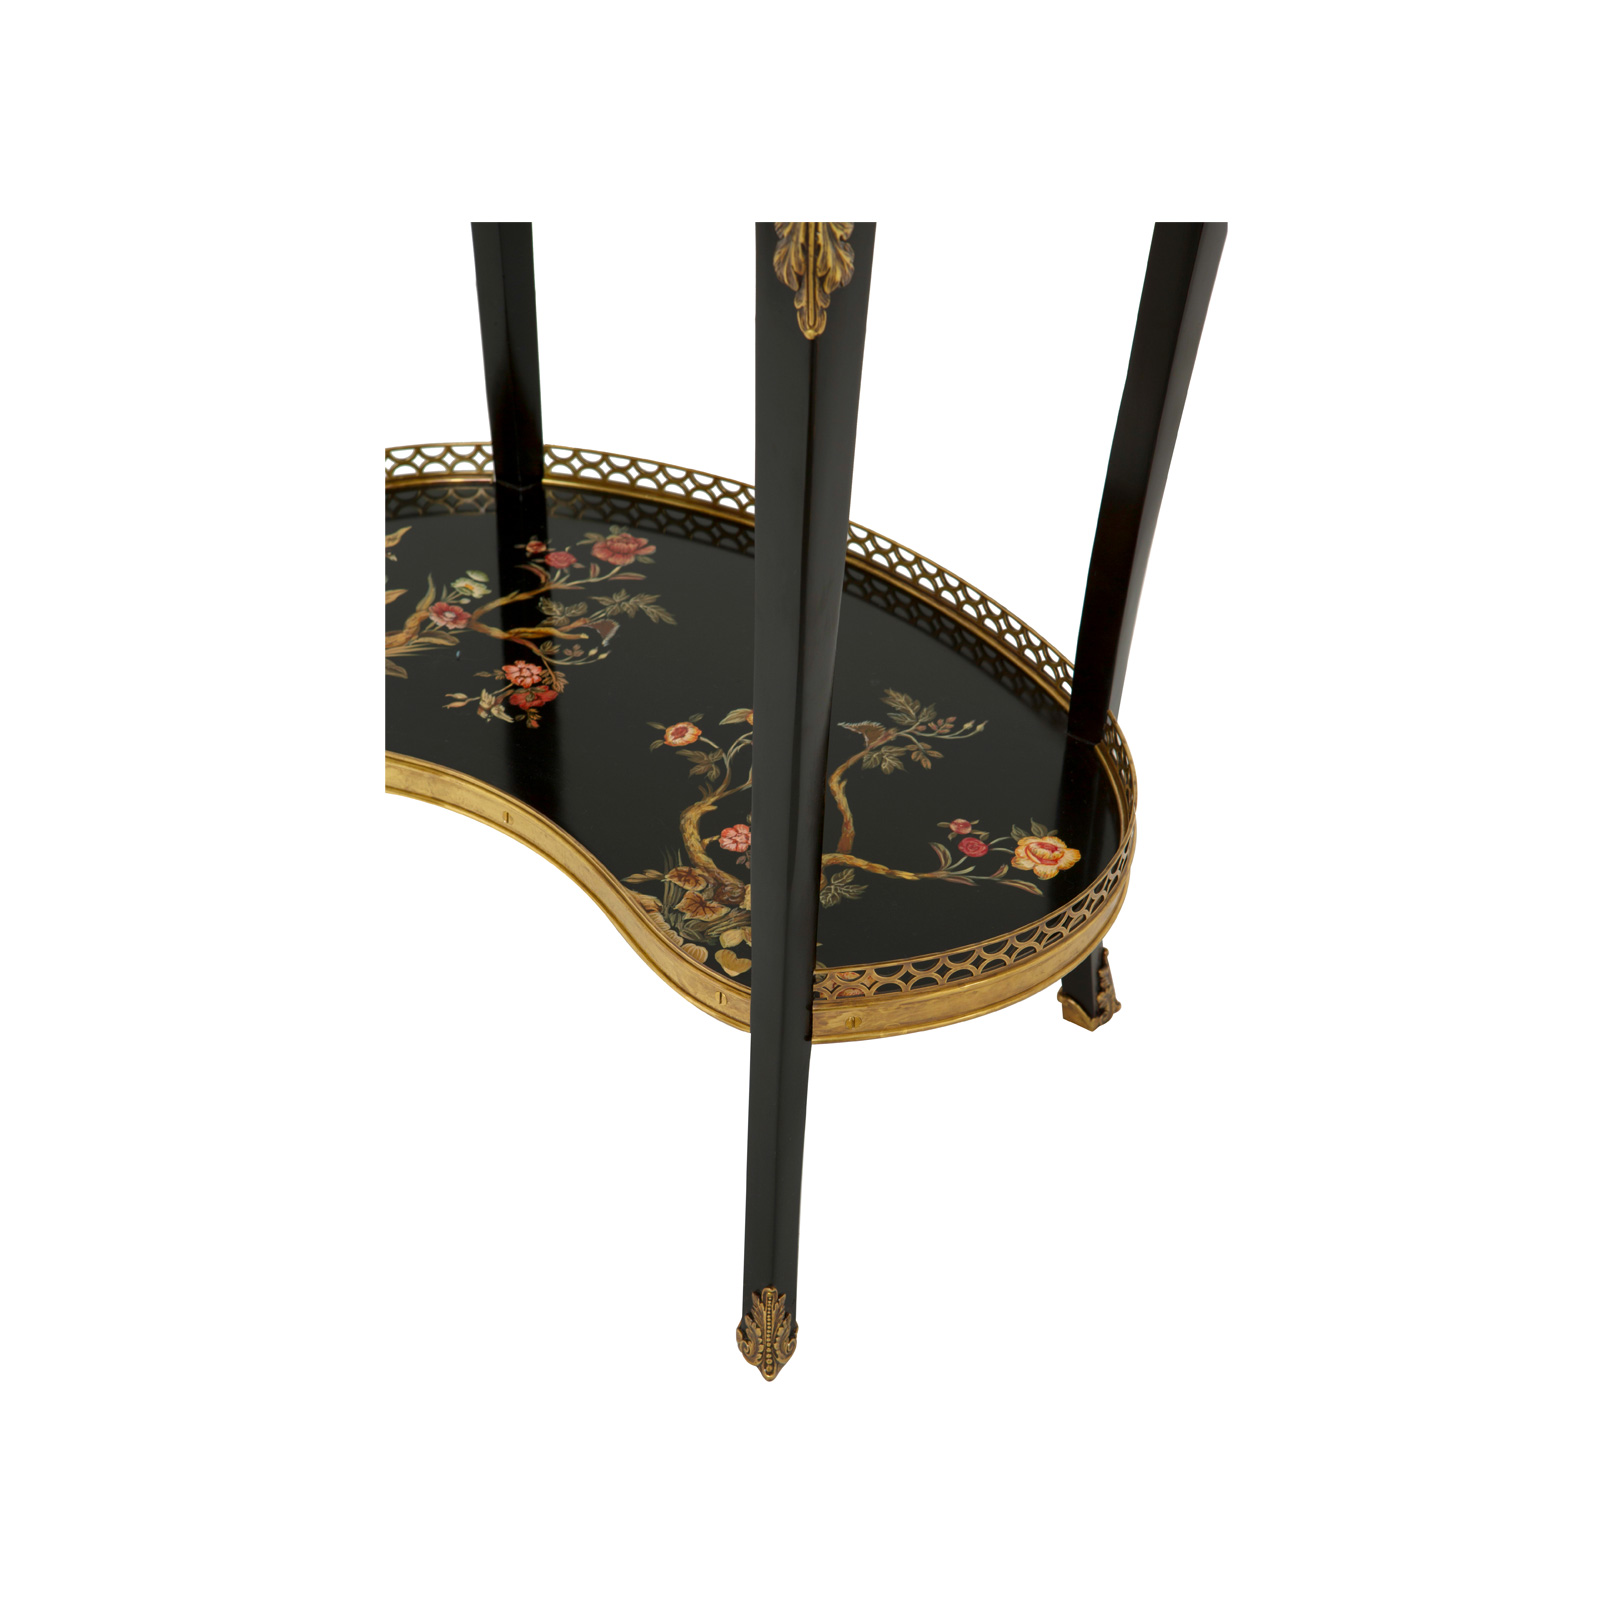 Stunning black hand painted side table features unique custom designed and crafted brass embellishment on the feet, legs and galleries. Each delicate flower is painted by hand by our dedicated craftspeople. Aston Court furniture takes on an artistic quality as all details are done by hand.